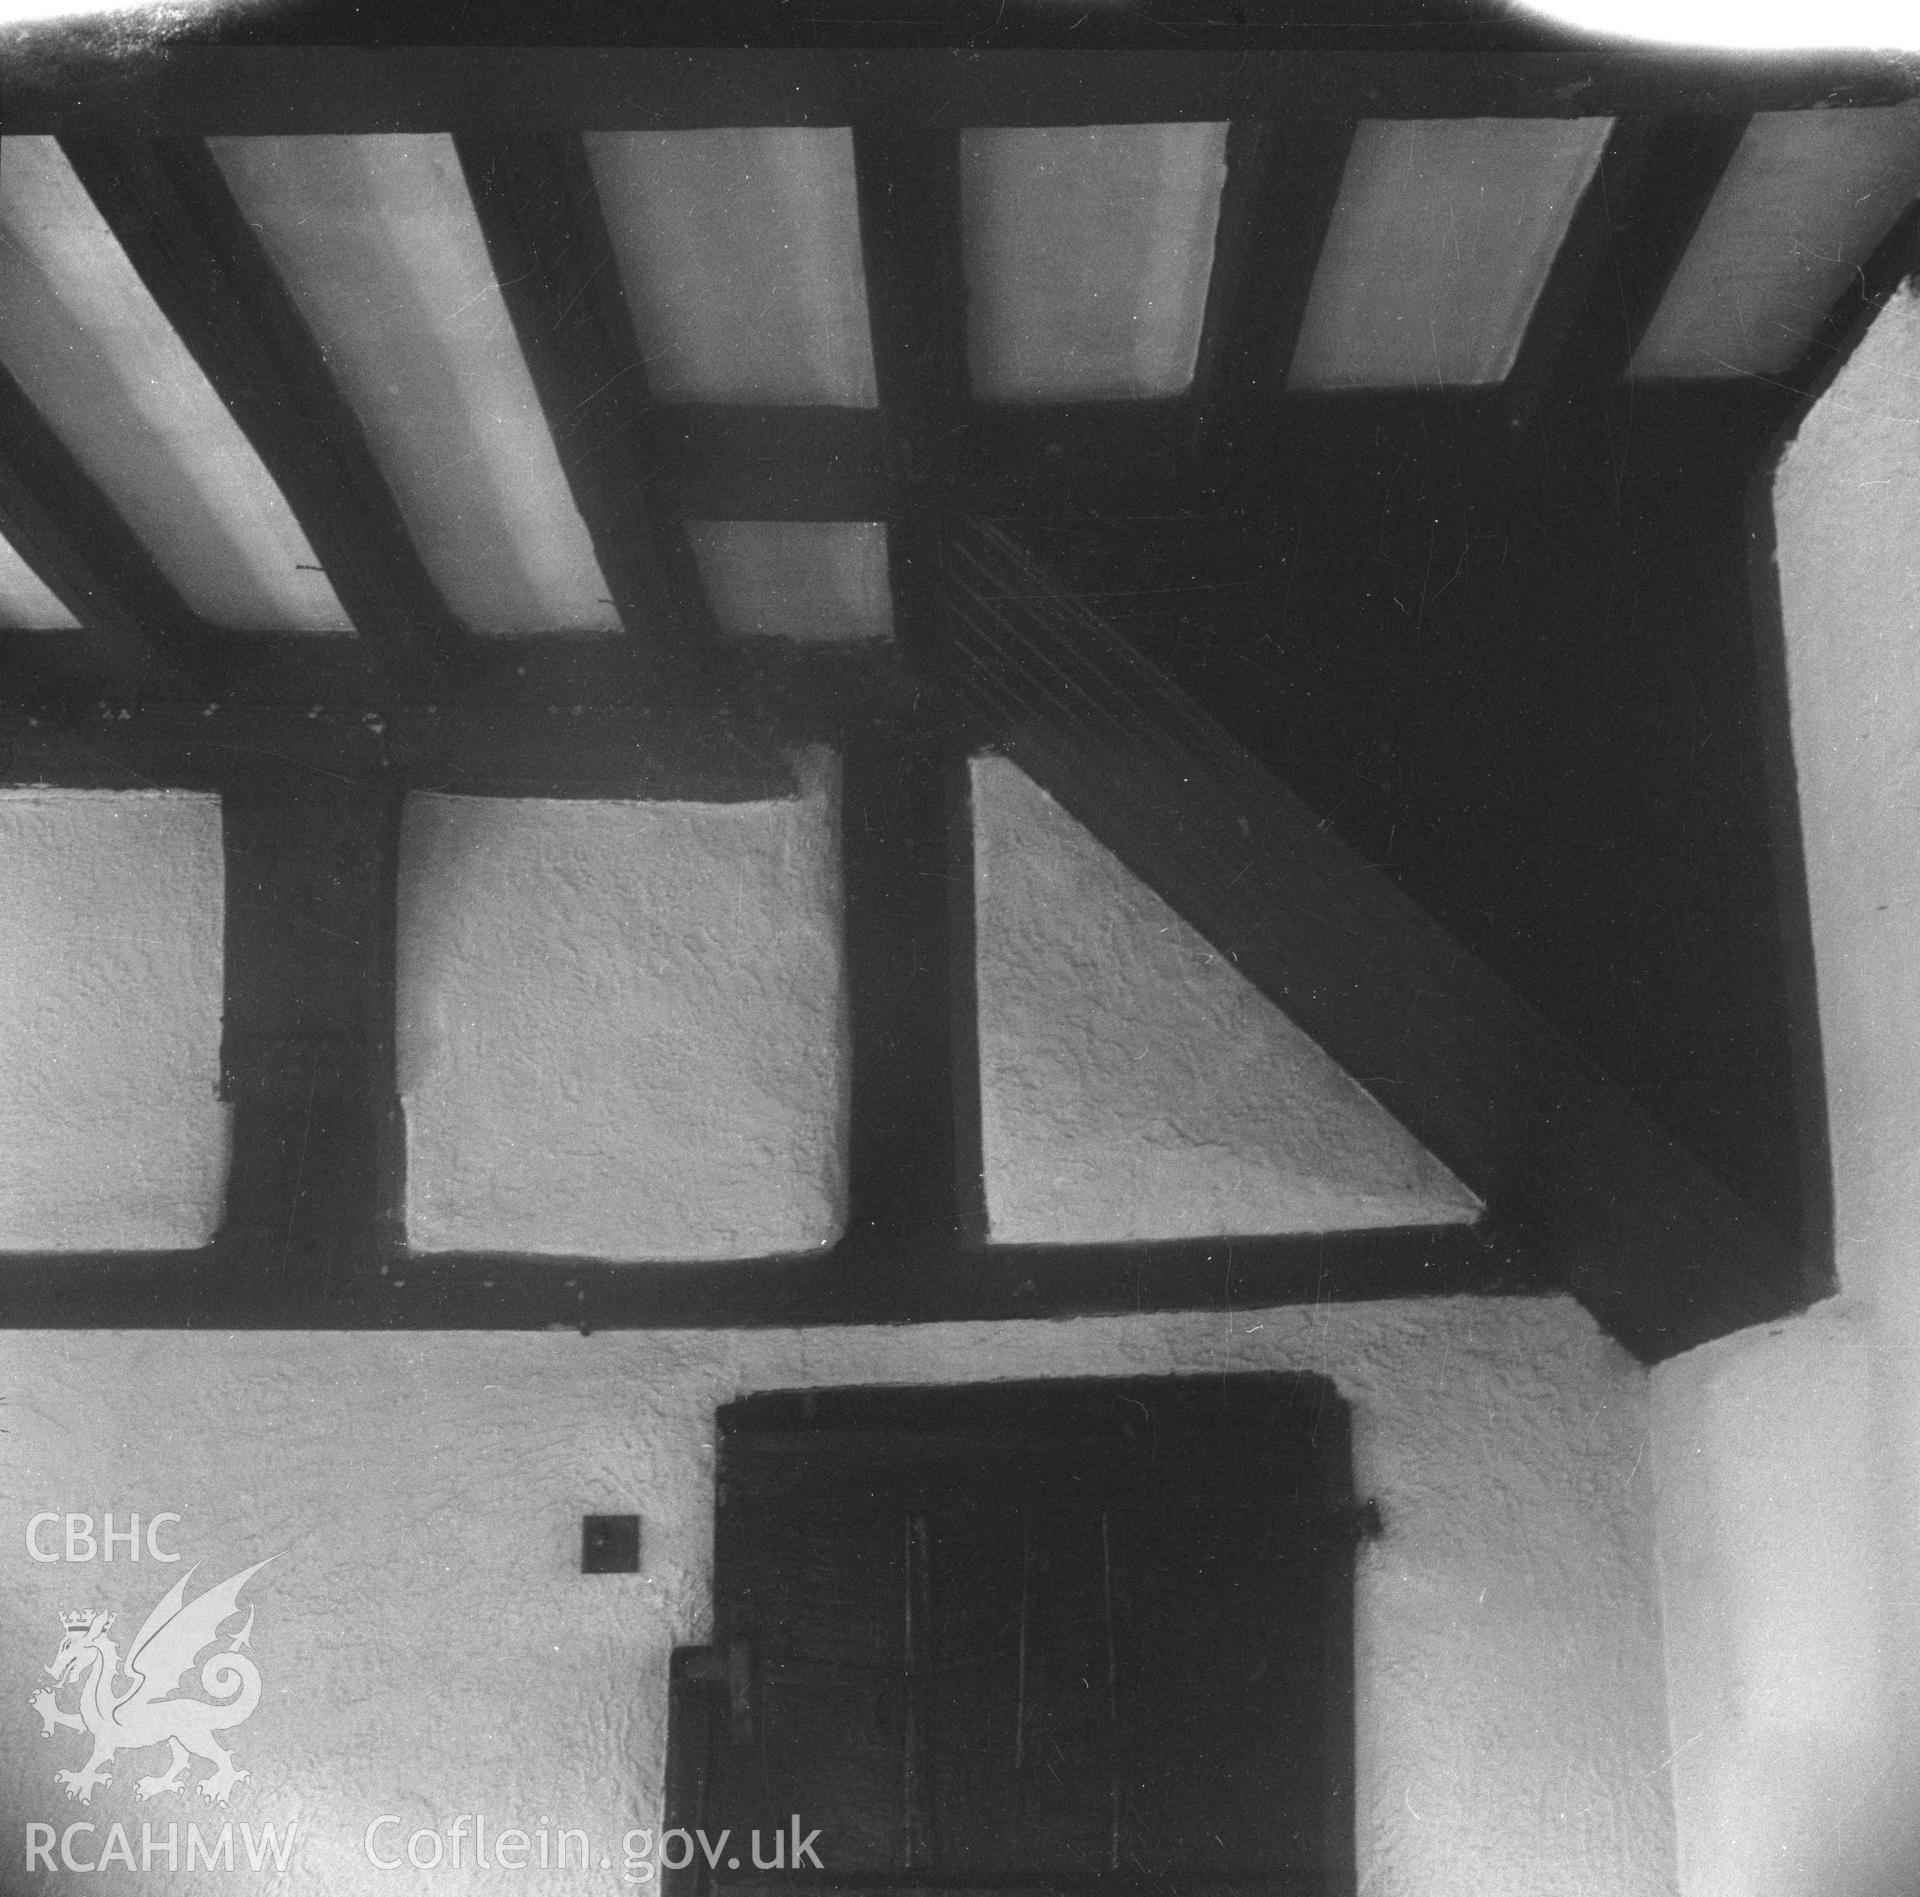 Black and white acetate negative showing interior detail of ceiling joists and beams, Brithdir-Mawr, Cilcain.